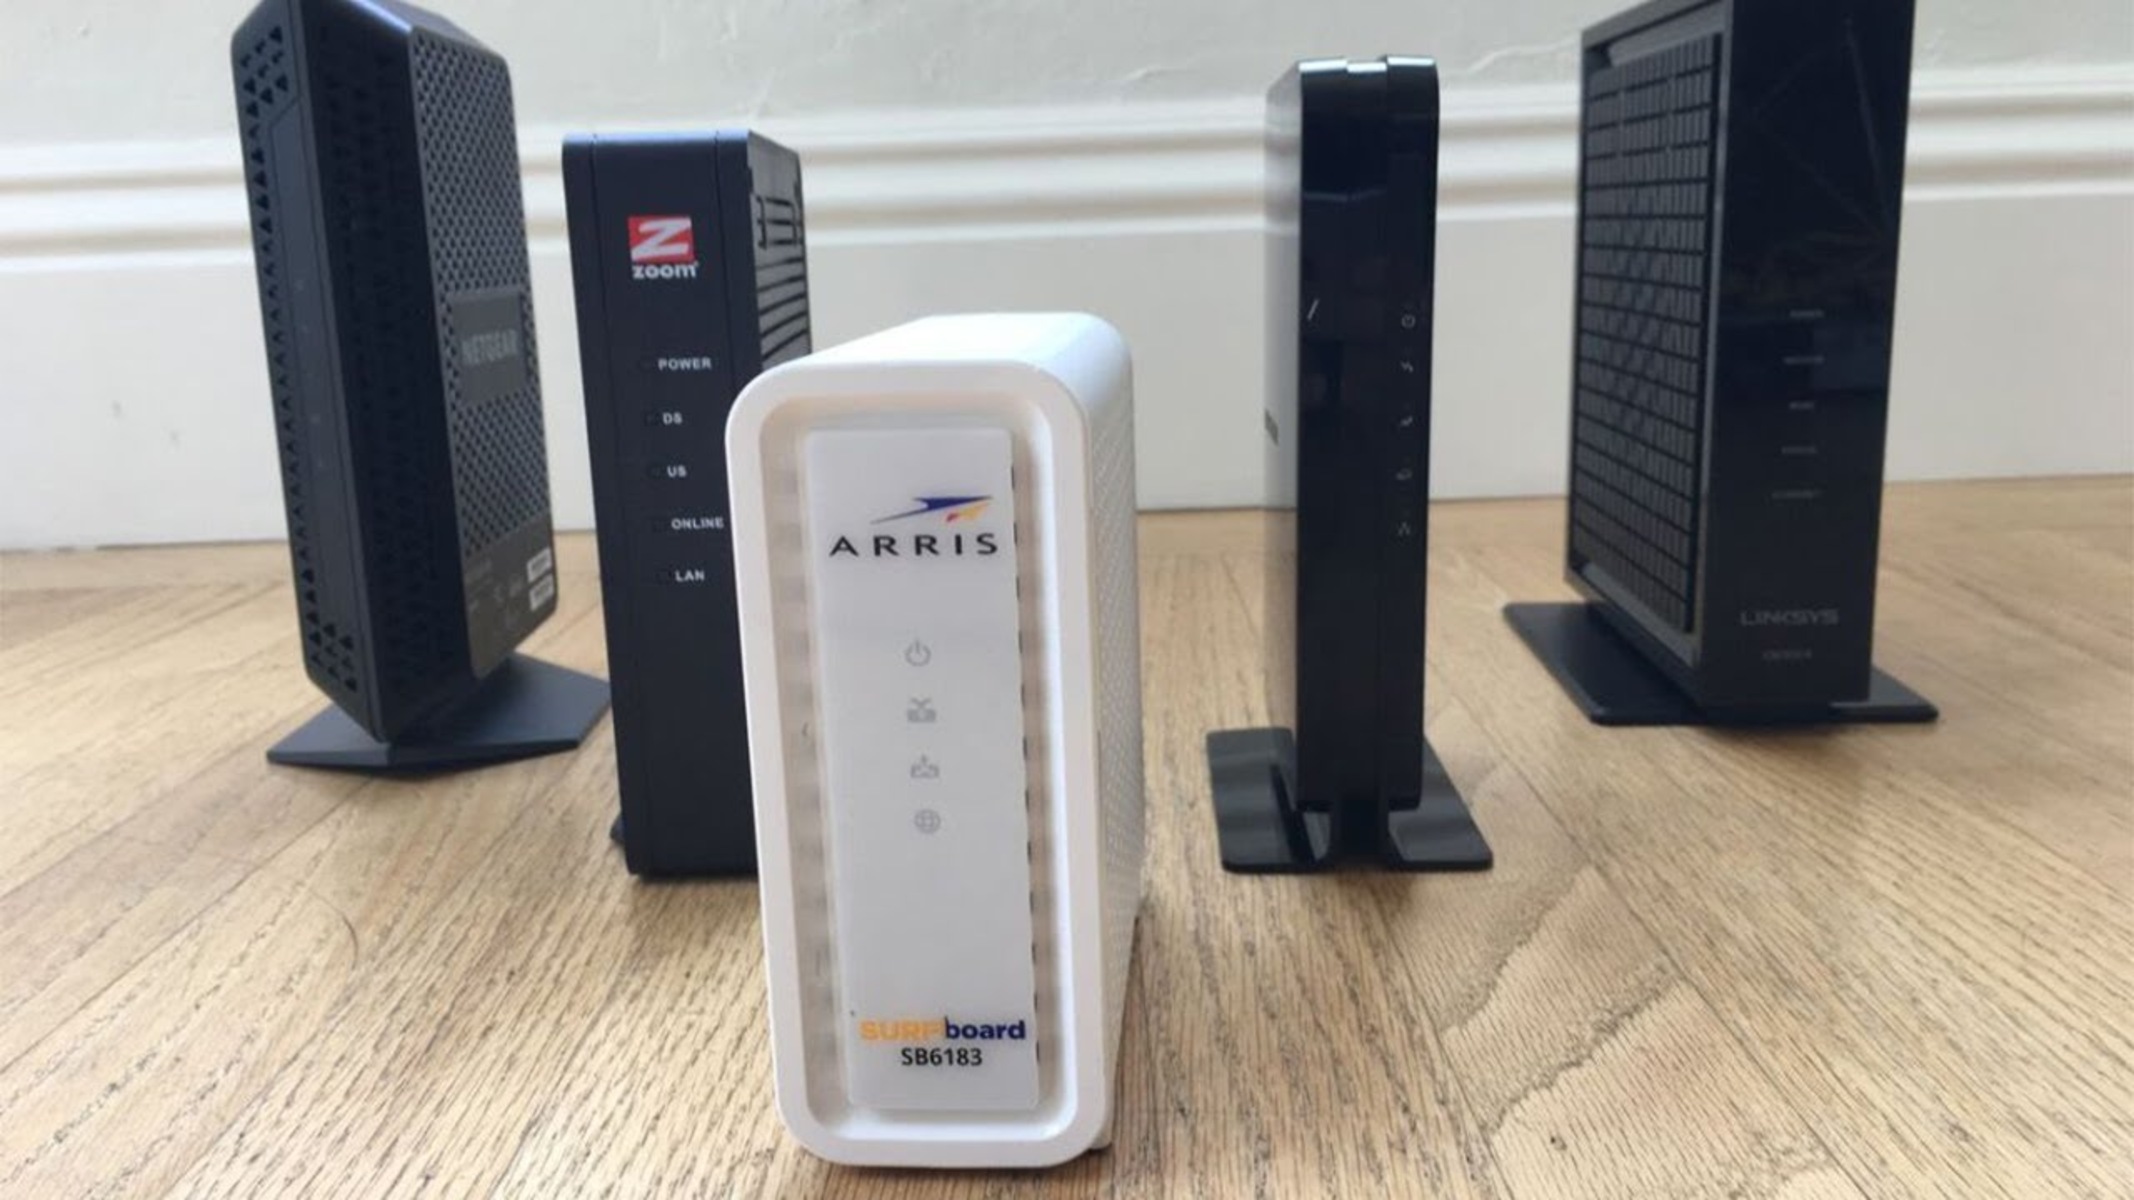 13 Best Comcast Modem And Router WiFi for 2023